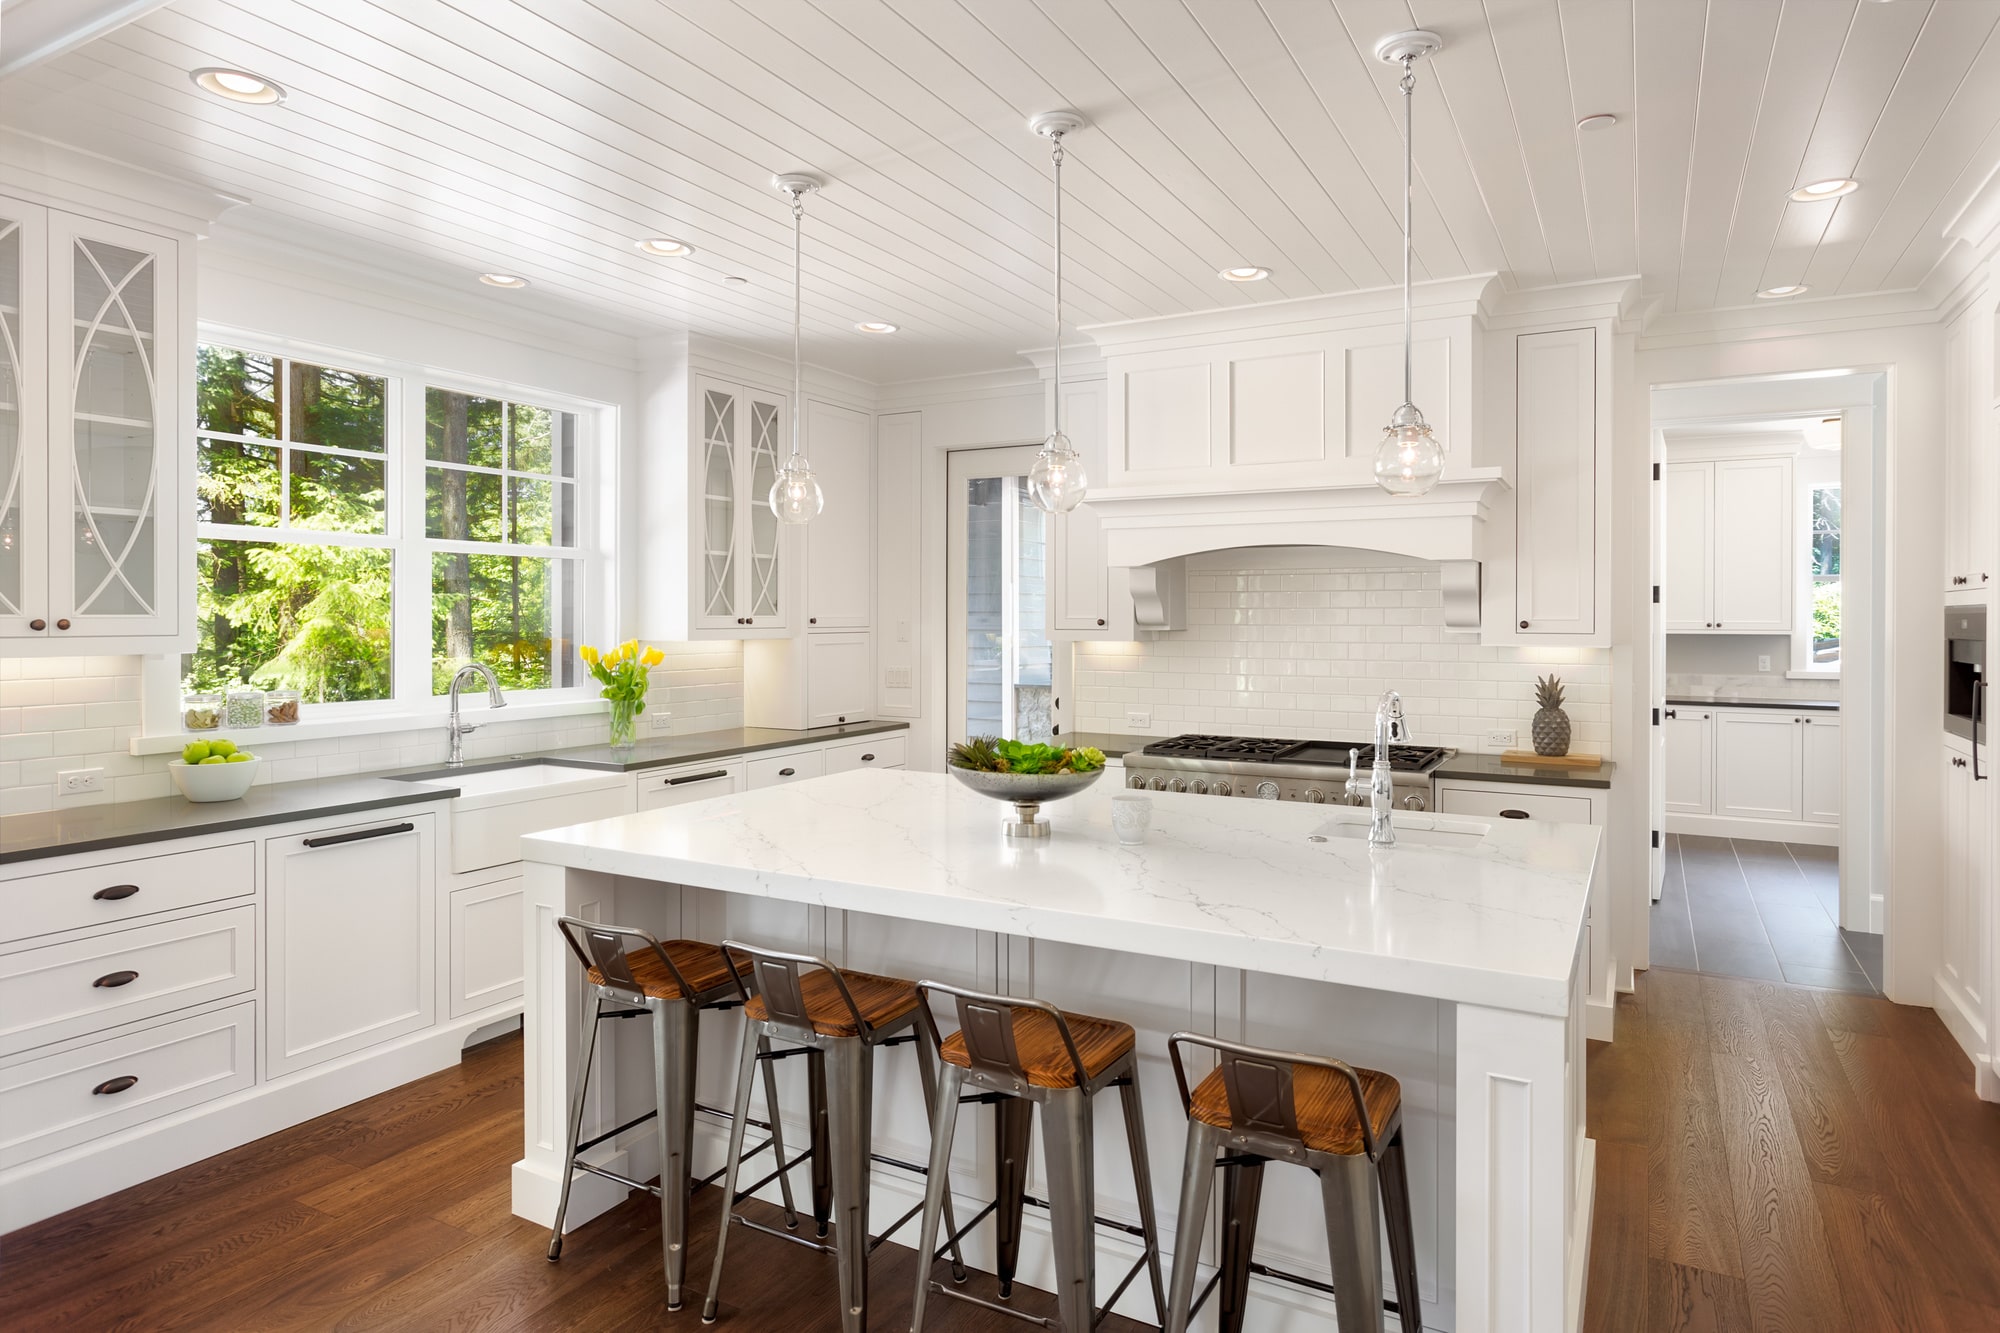 Kitchen Remodeling Services, Home Remodeling Services